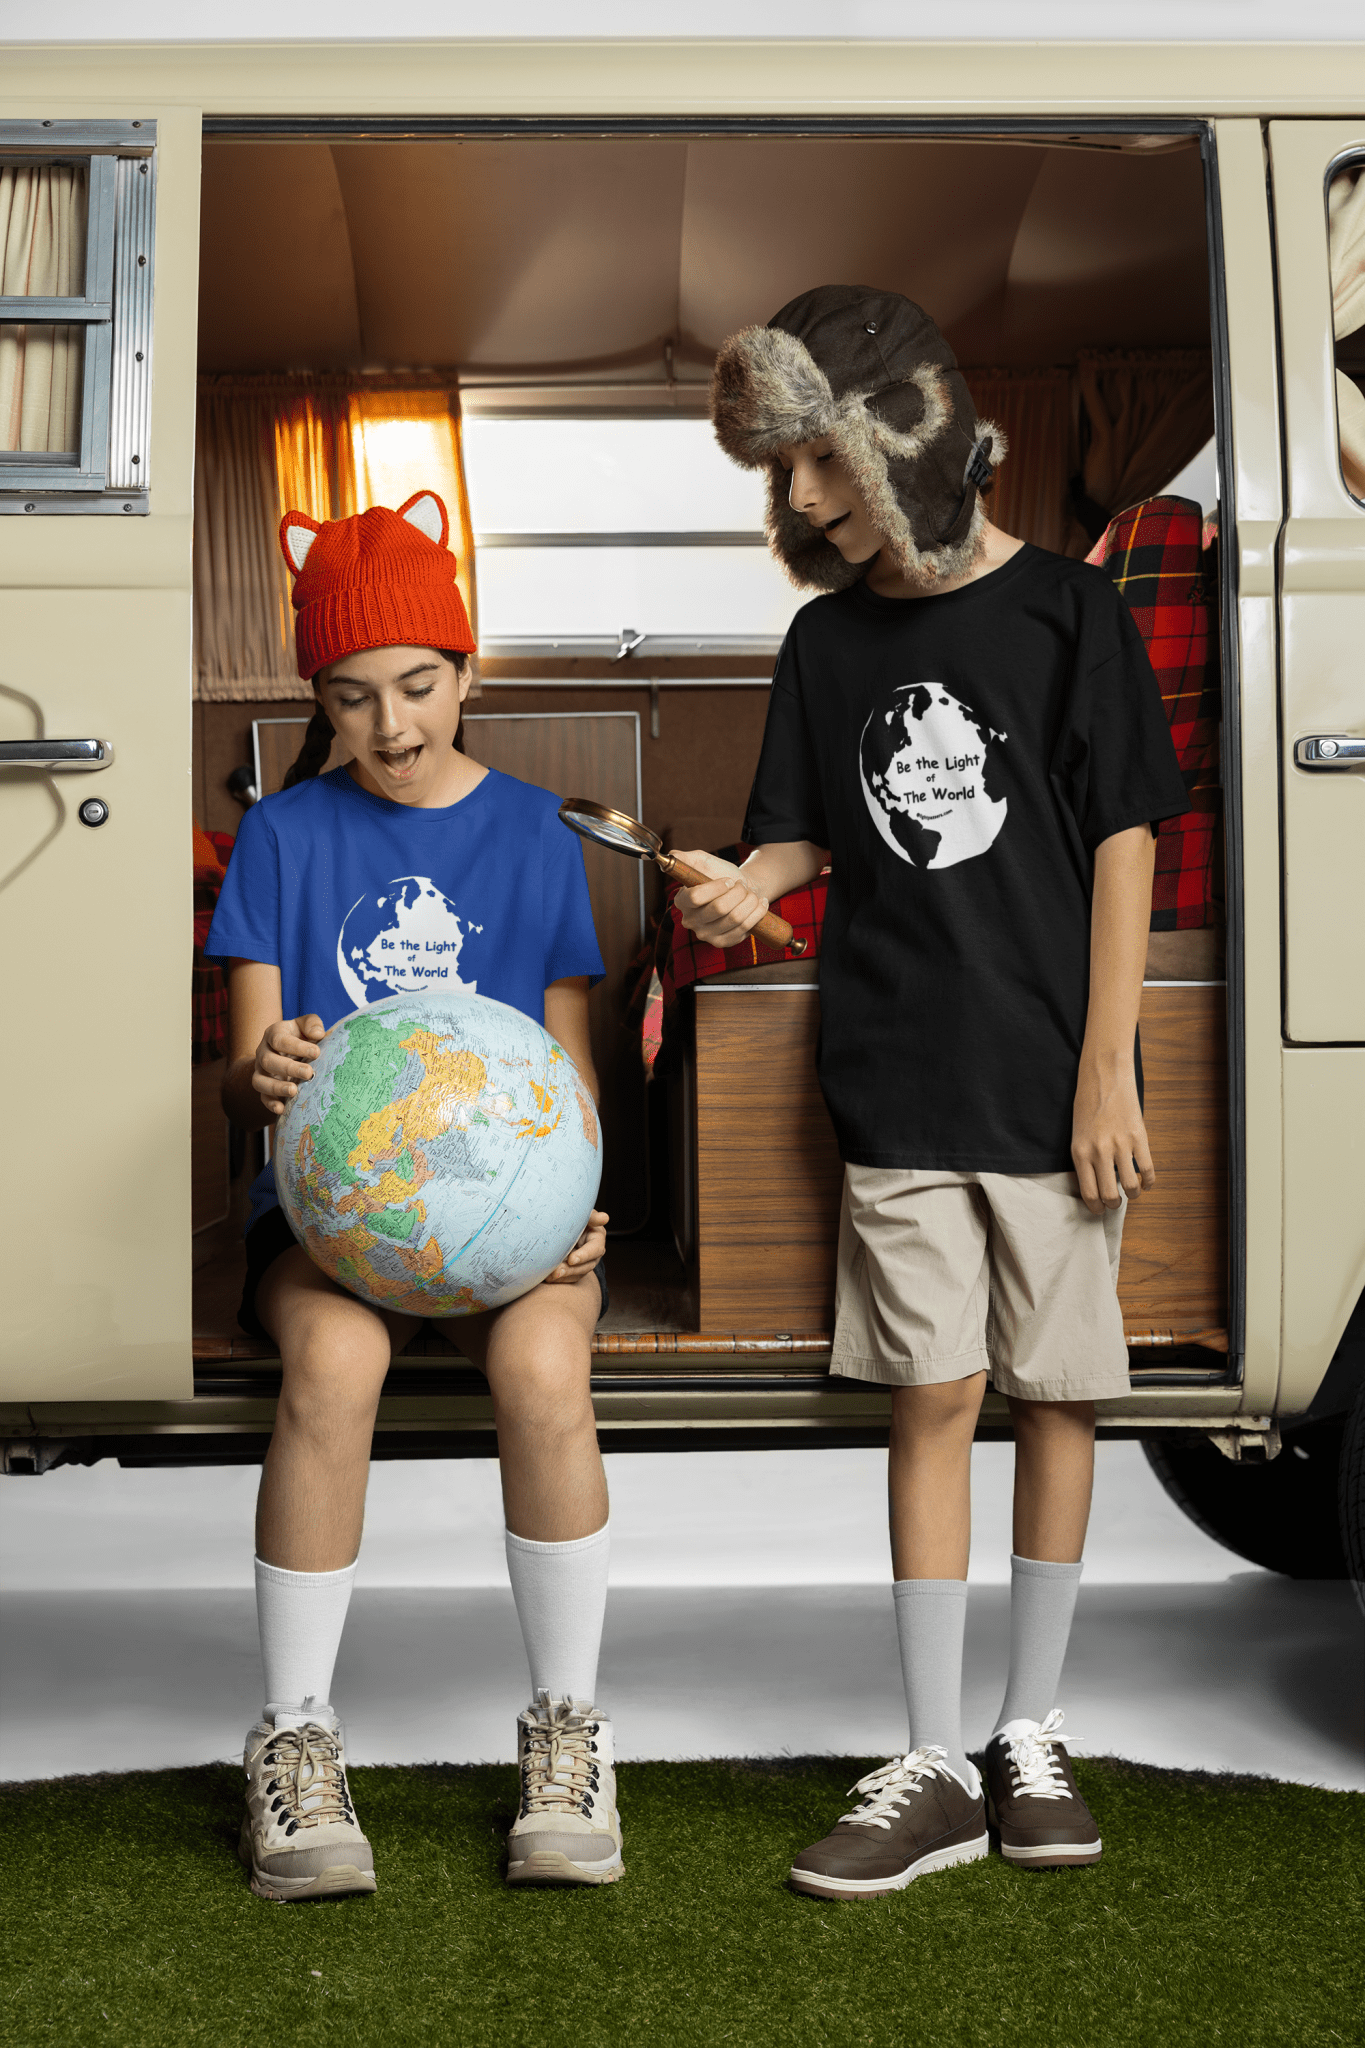 Youth tee featuring a boy and girl in hats looking at a globe, embodying innocence and curiosity. Made of soft cotton, light fabric, tear-away label, and a high-quality print.